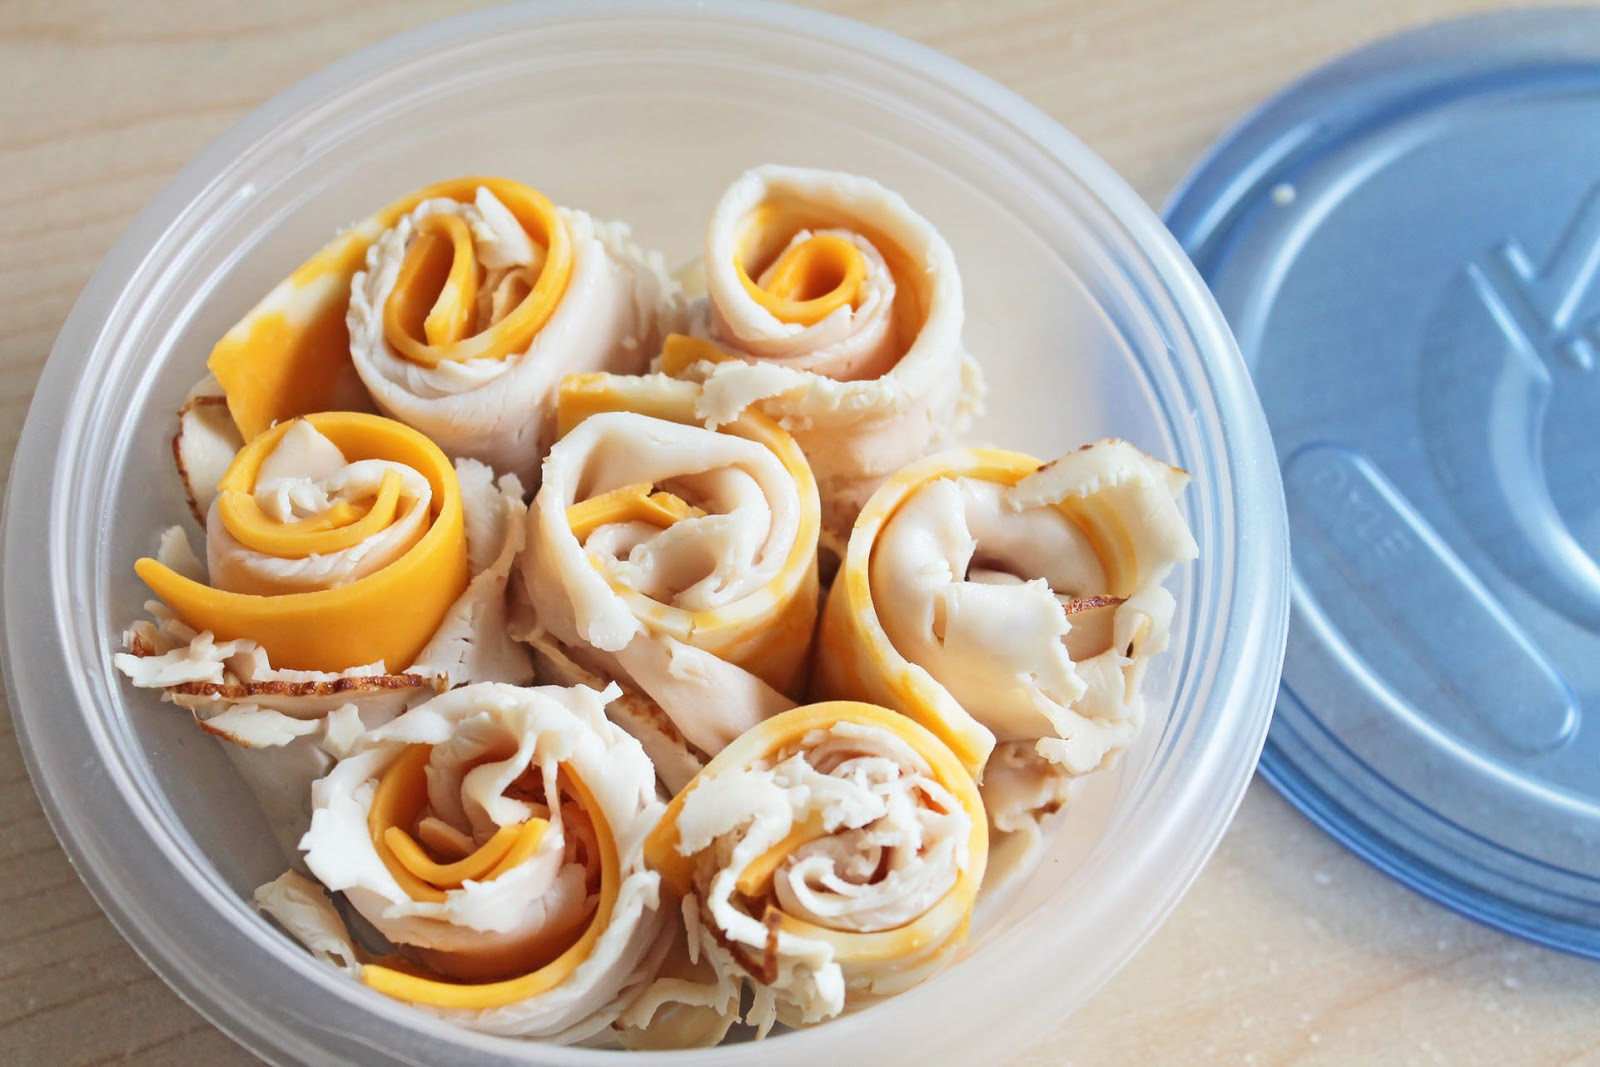 Healthy Snacks For Adults At Work
 Easy to Make Snacks Turkey and Cheese Rolls Recipe